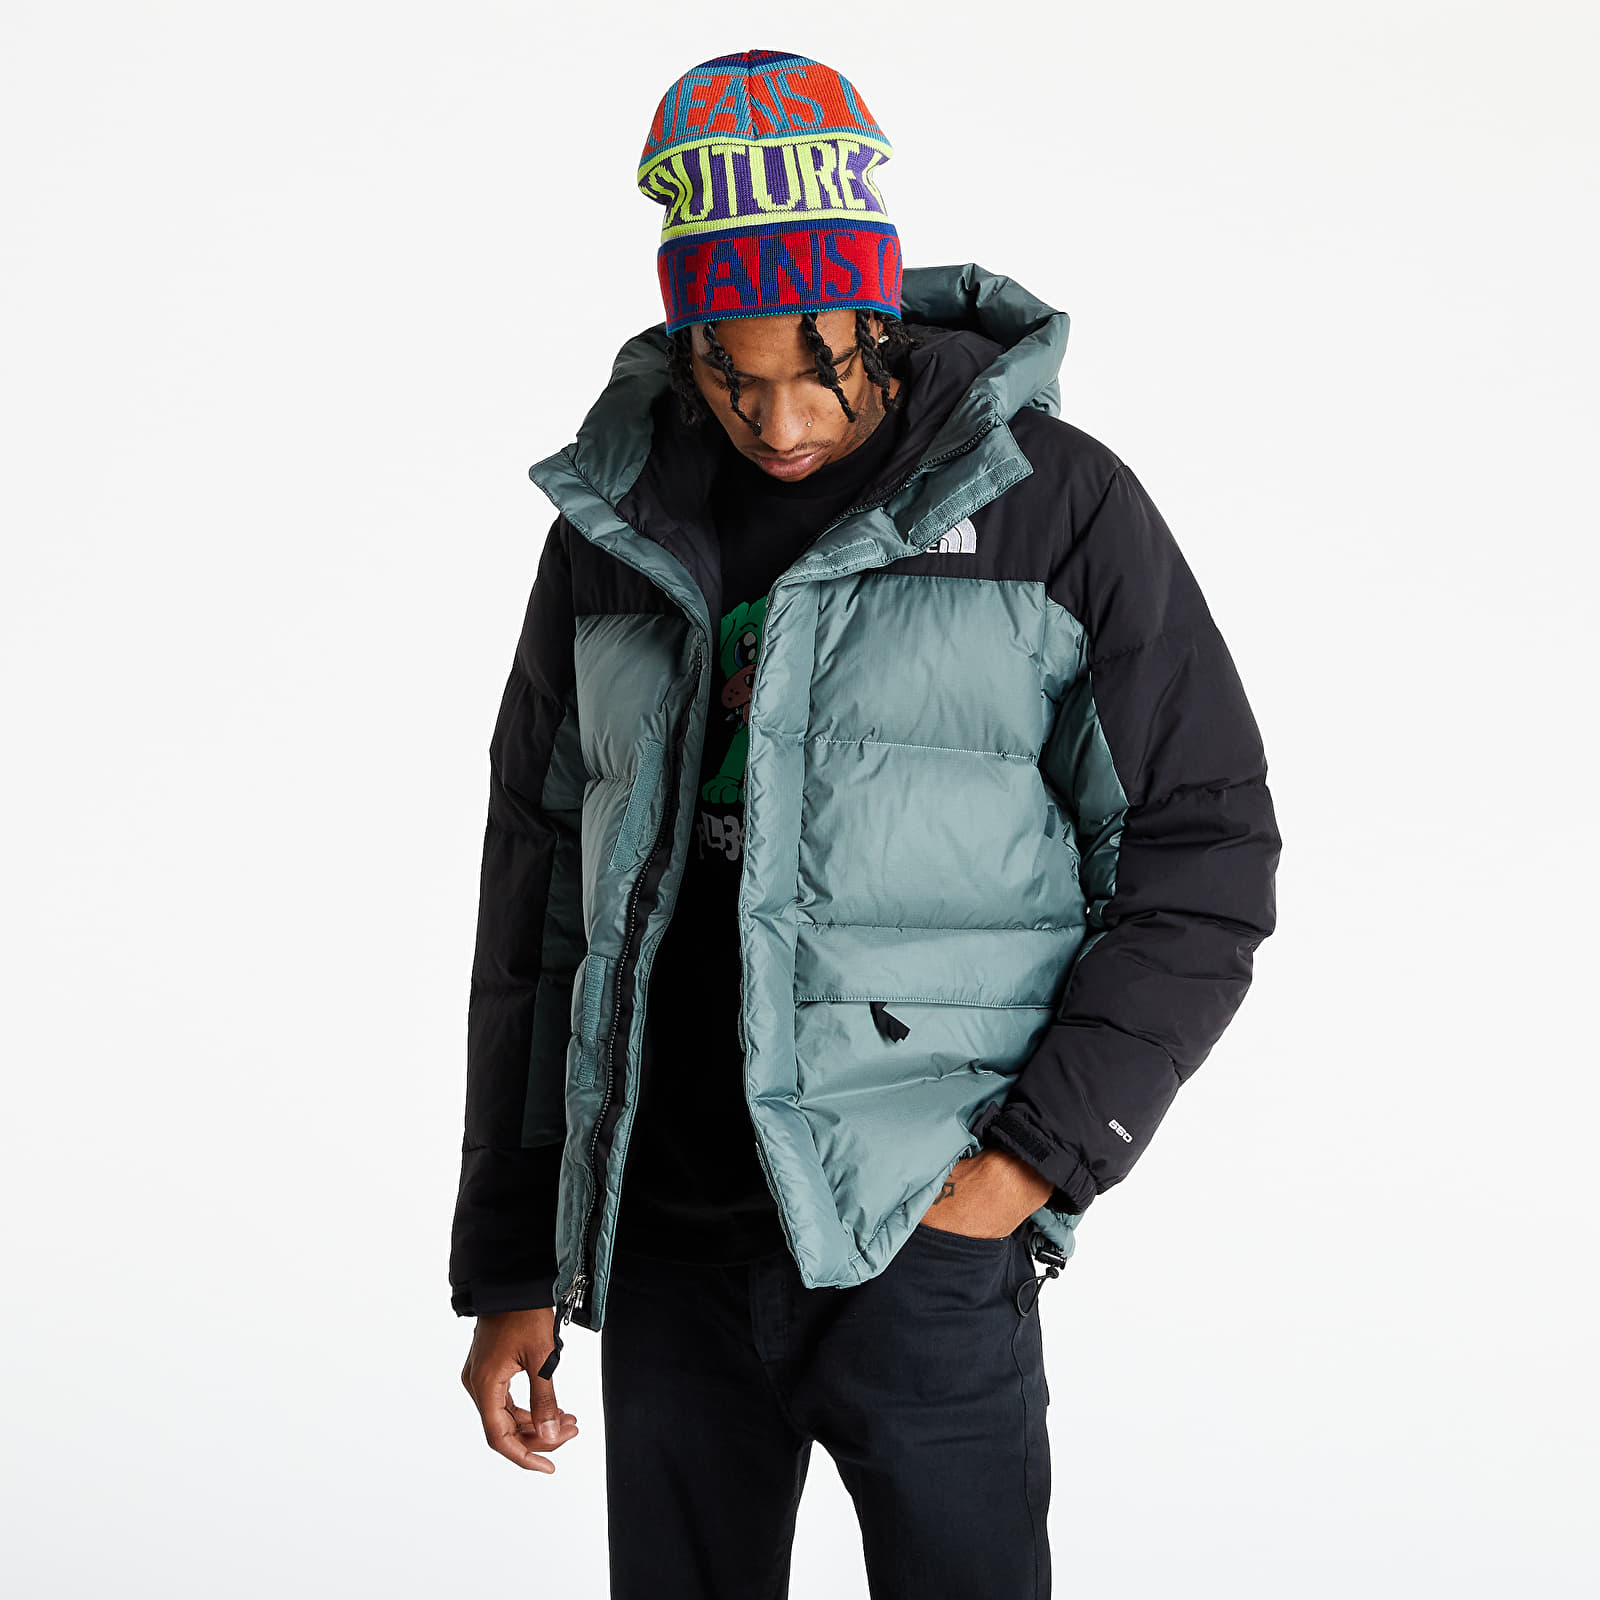 Manteau d'hiver The North Face Himalayan Hommes